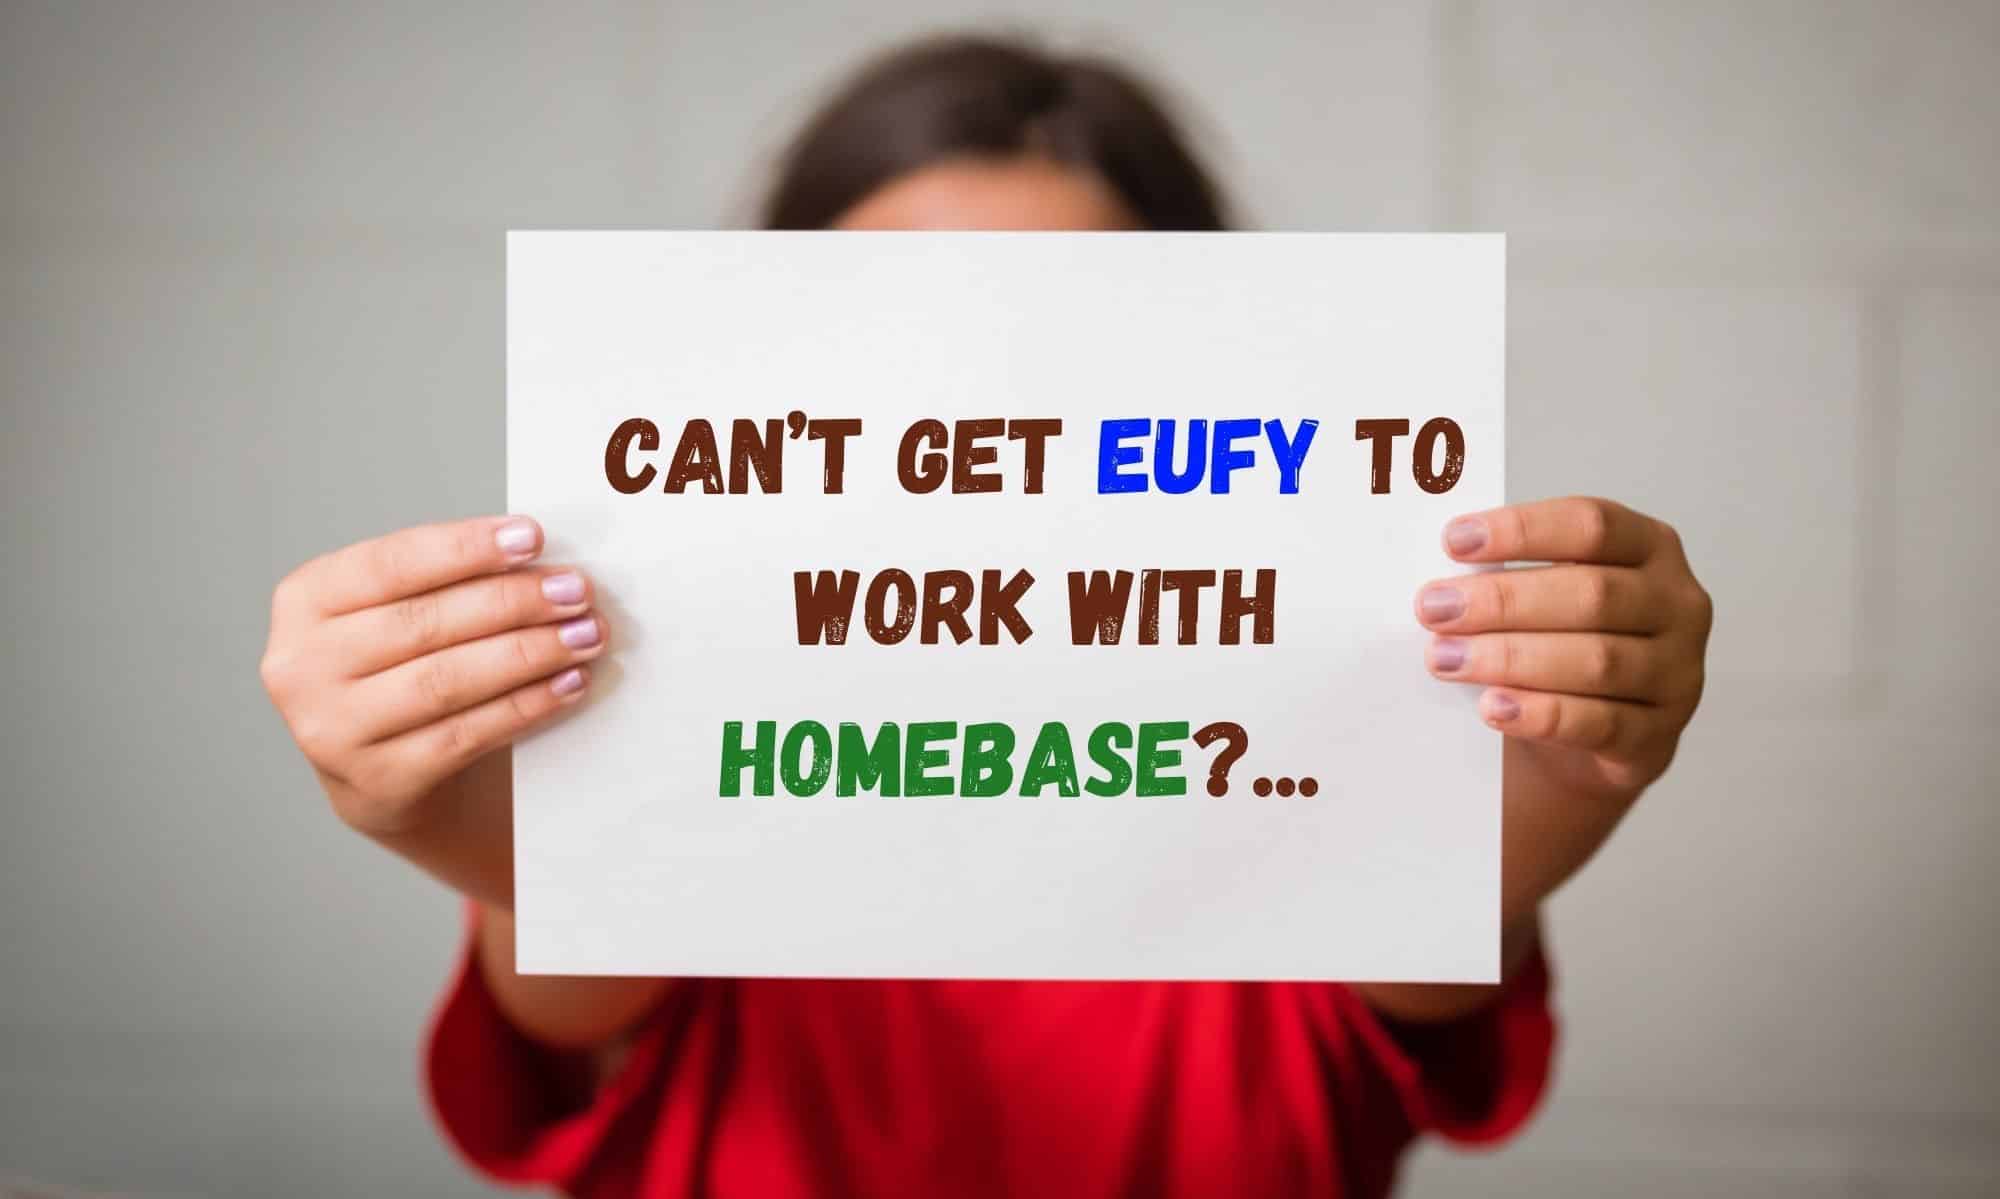 Can’t get Eufy to work with Homebase